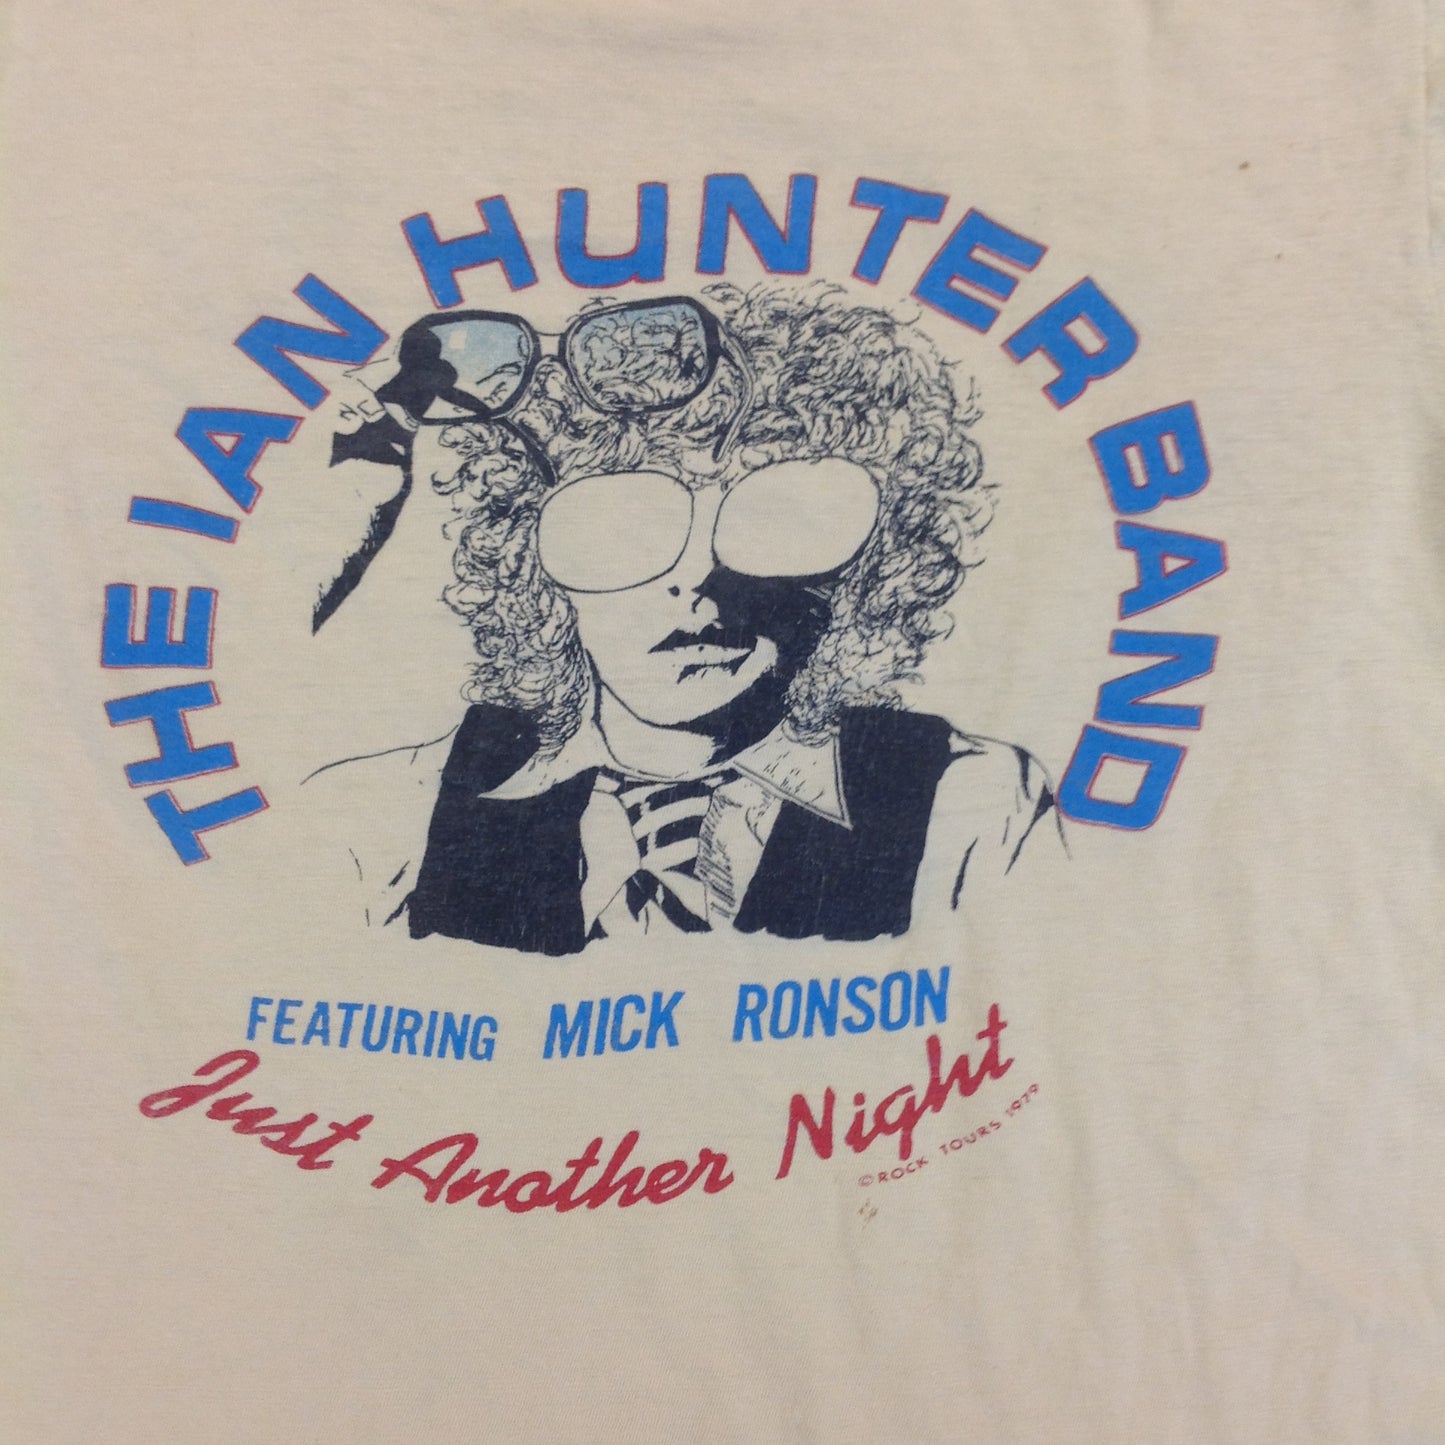 Vintage 1979 The Ian Hunter Band Featuring Mick Ronson Just Another Night U.S. Tour '79 T-Shirt